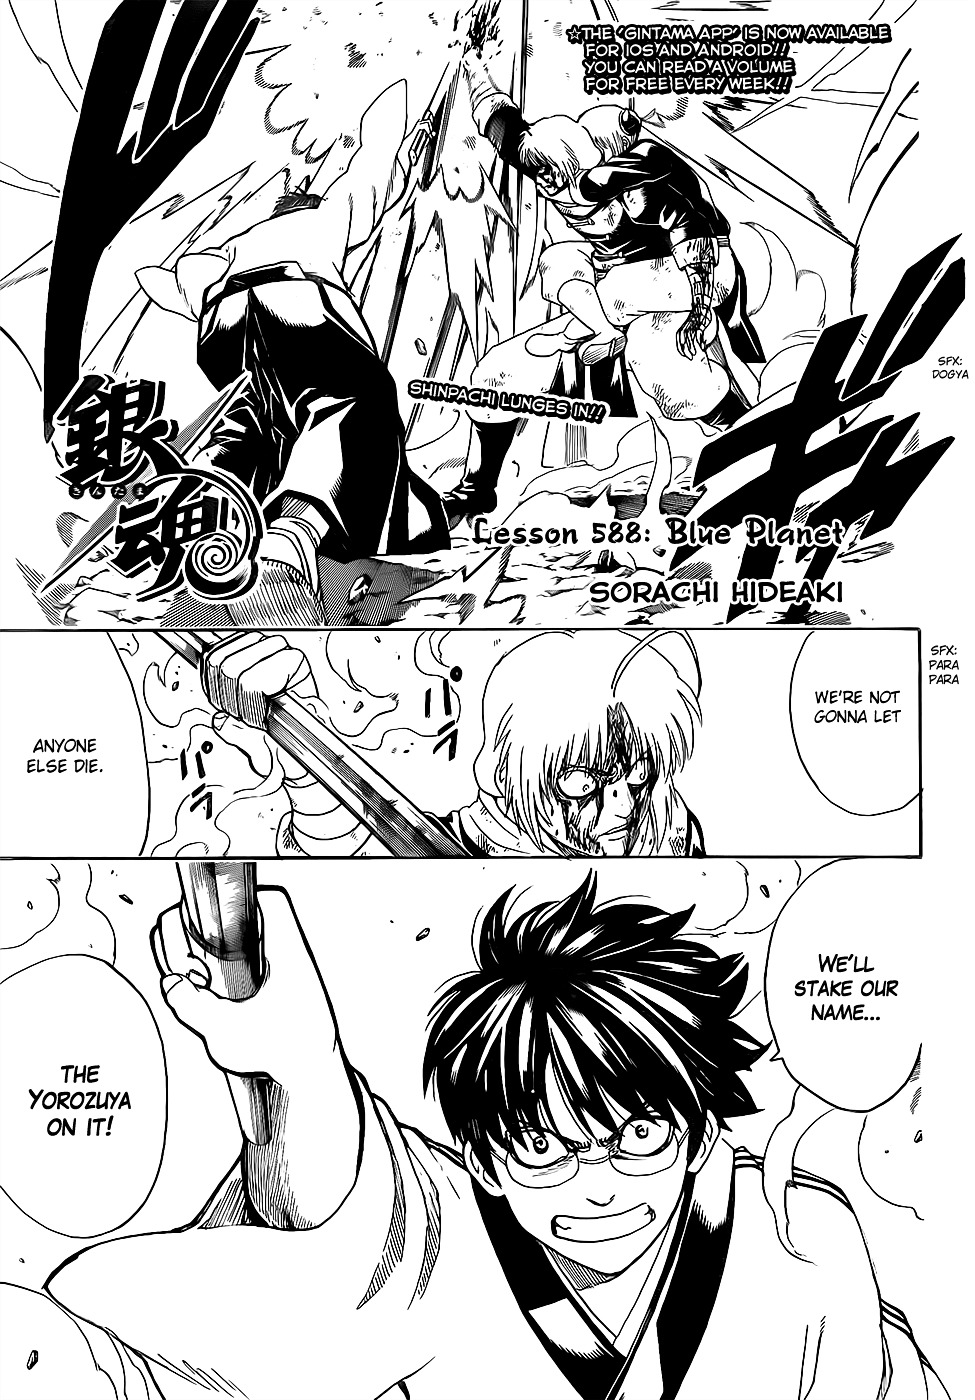 Gintama Vol.65 Chapter 588 : Blue Planet - Picture 1